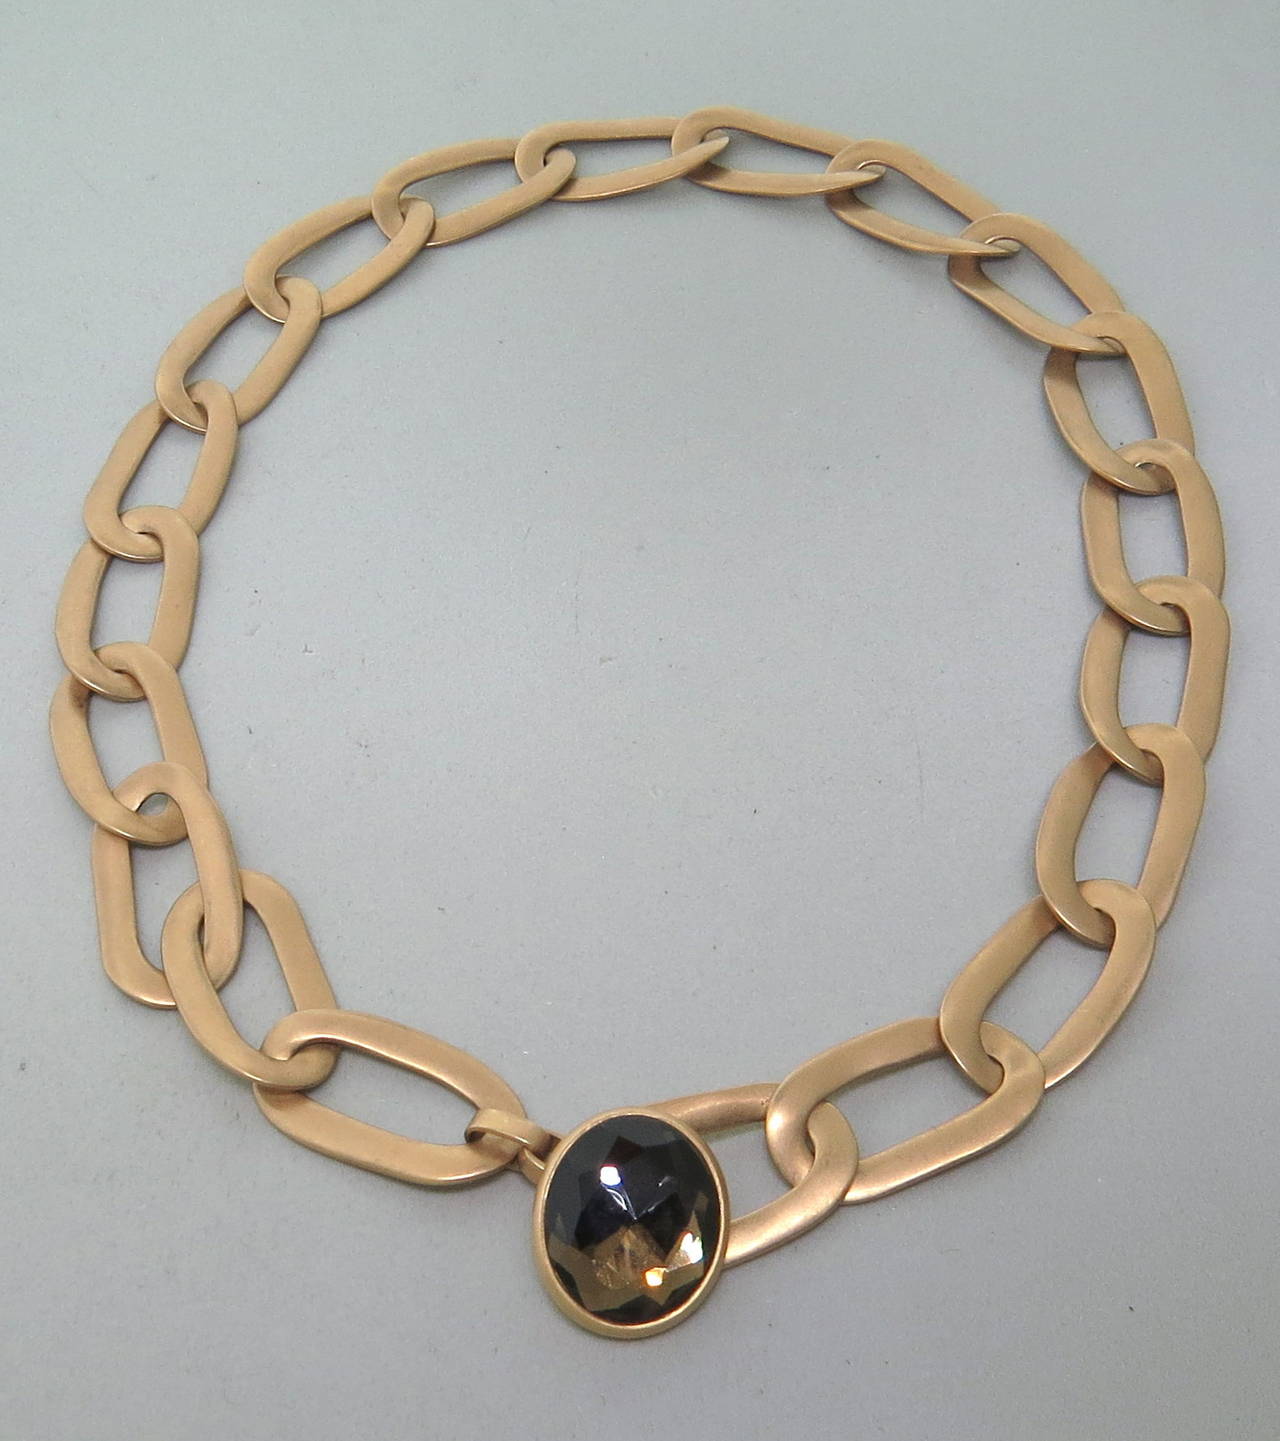 Pomellato 18k gold oval link necklace with smokey topaz from Narciso collection. Necklace is 17